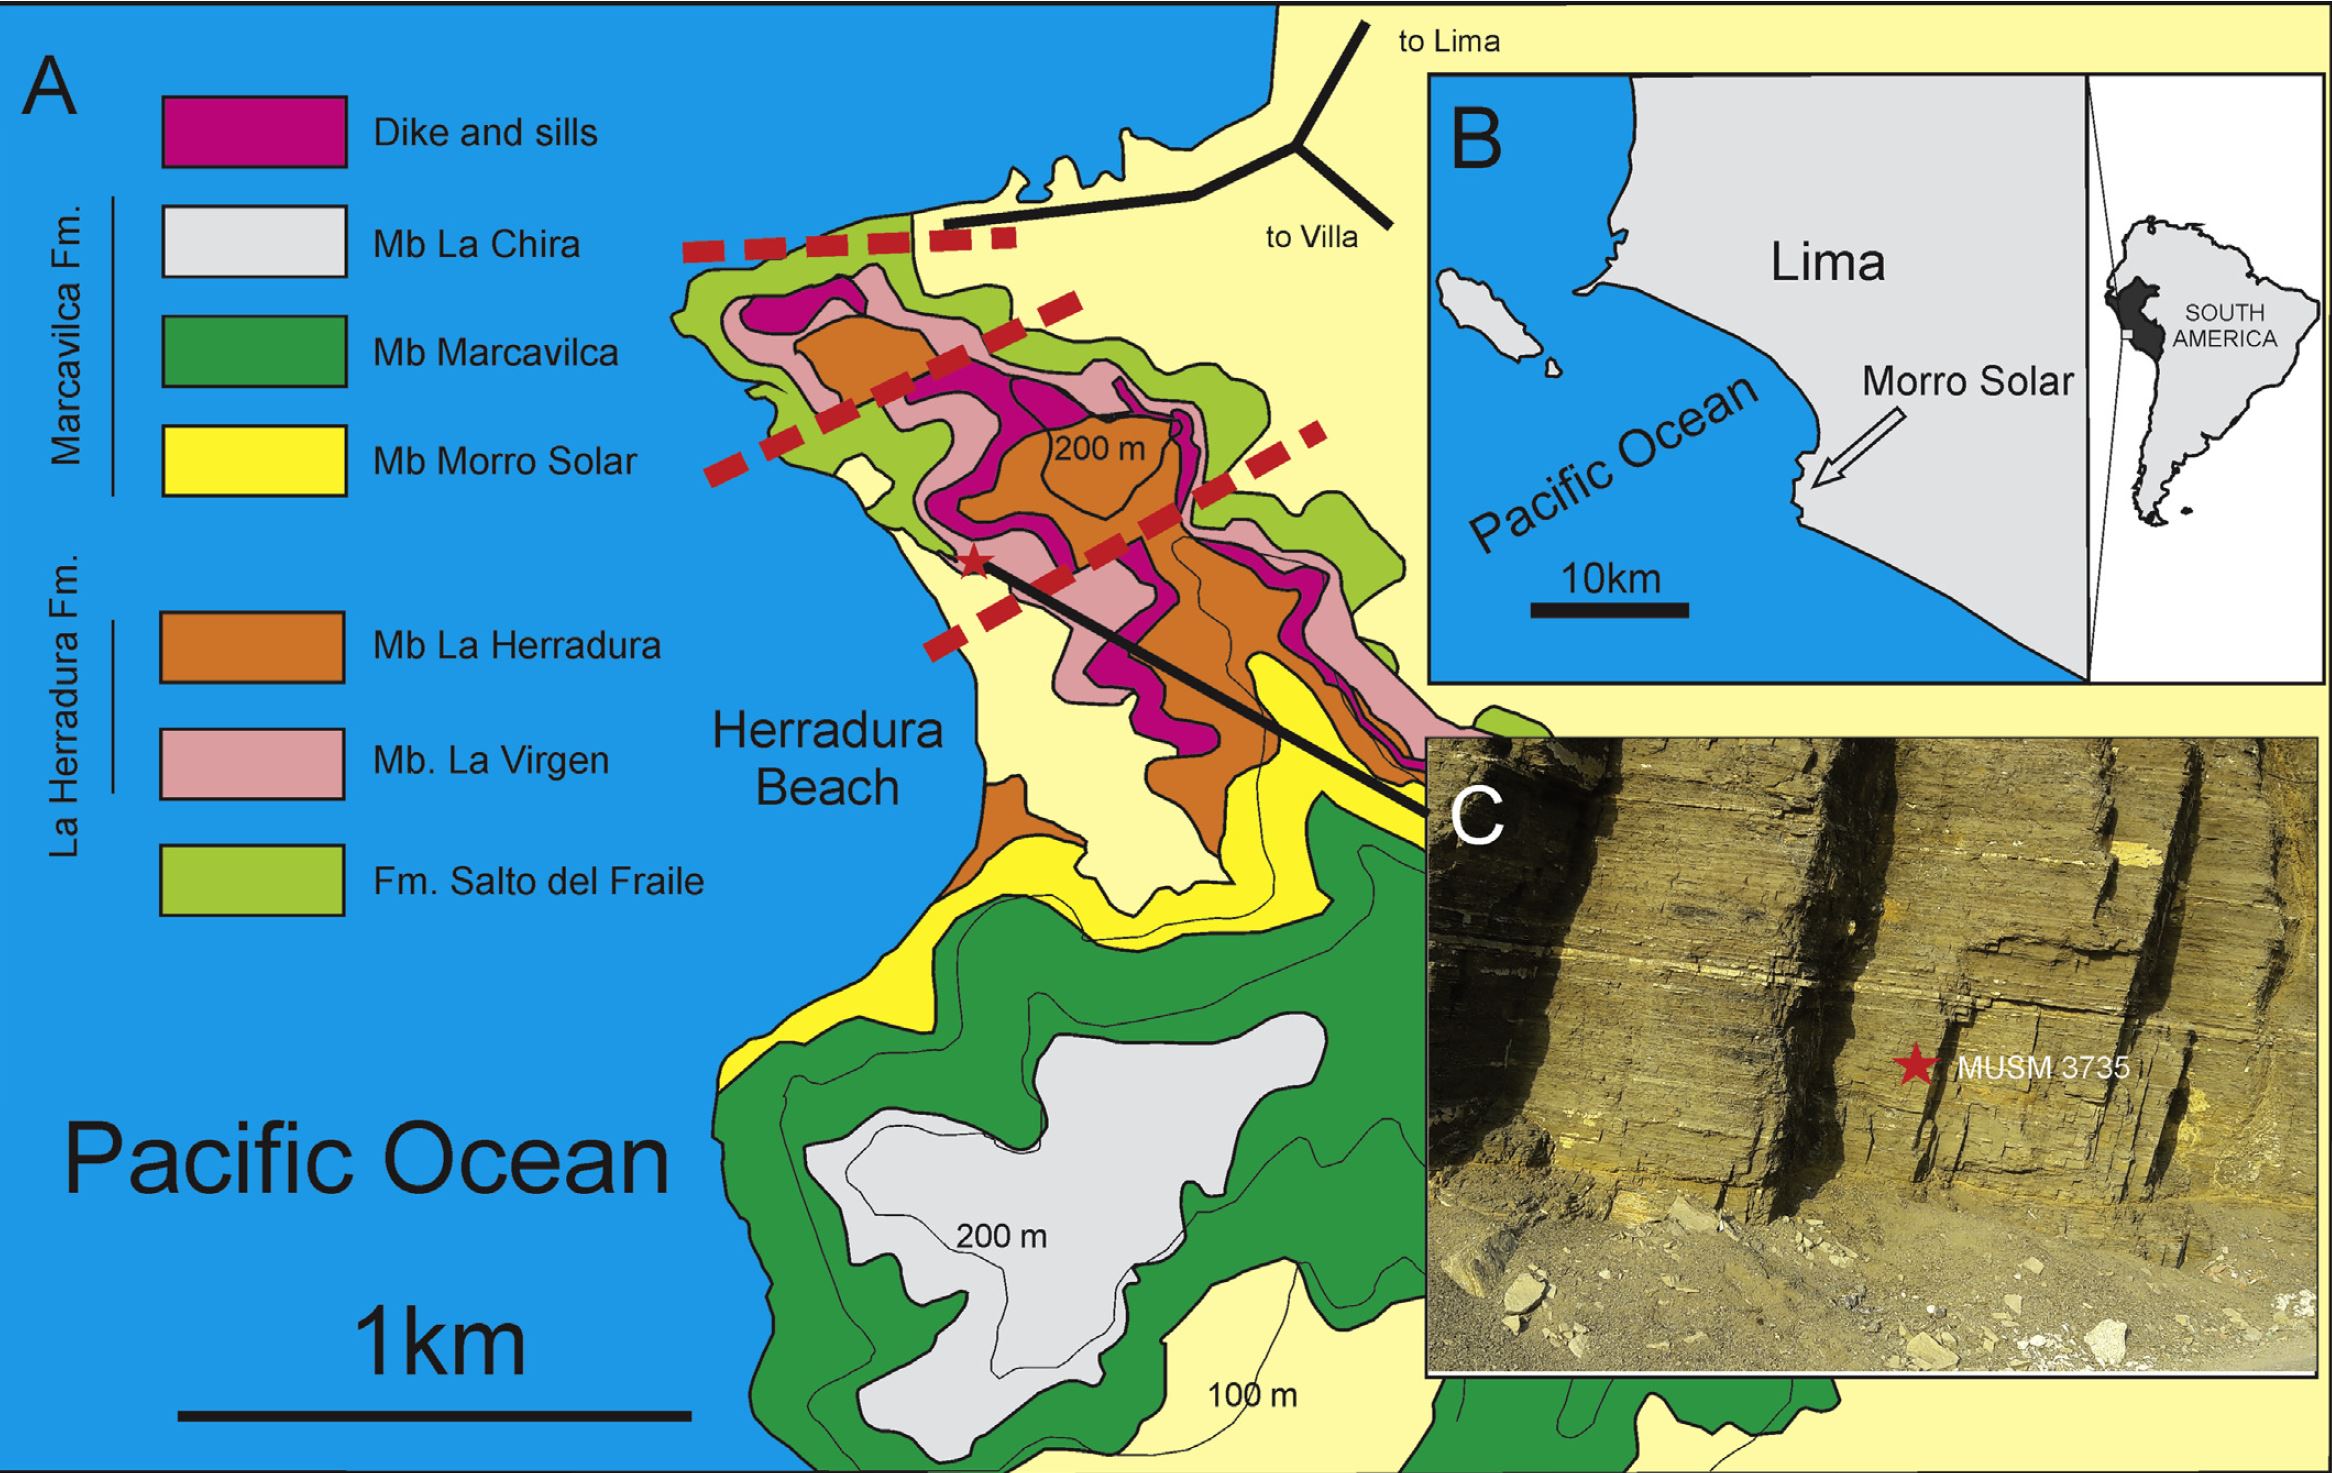 The map and the fossil found location of the Plesiosaur